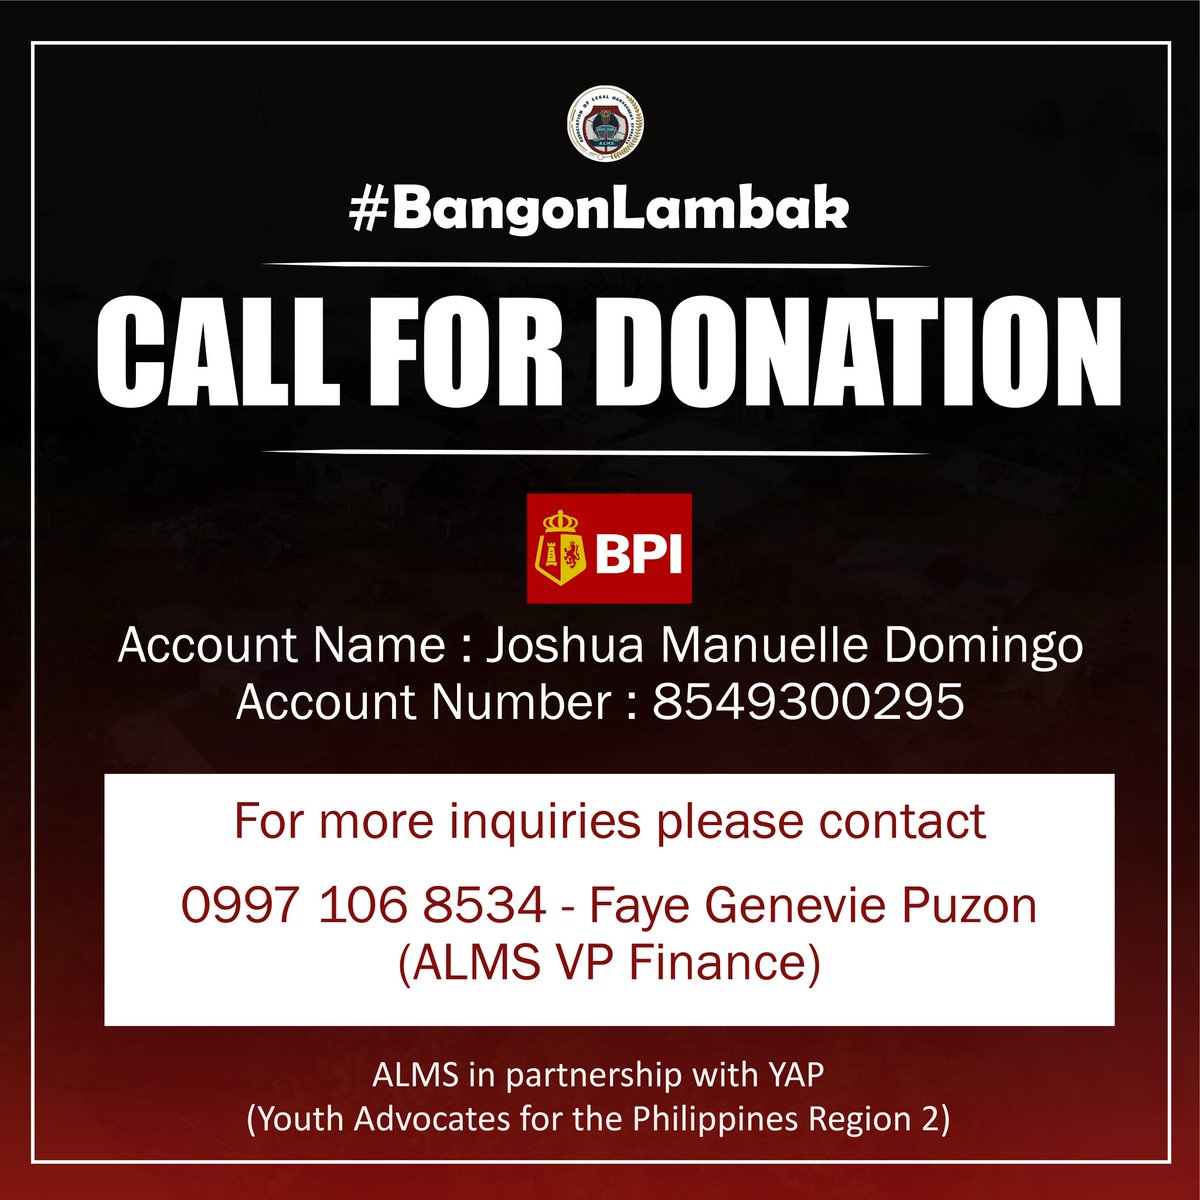 Please contact the person in-charge before or after donating. Thank you so muuch! Agyaman!

As of November 16, 2020, The Association of Legal Management Students (ALMS) partnered with the Youth Advocates for The Philippines (YAP) Region 2 in their #BANGONLAMBAK donation drive.